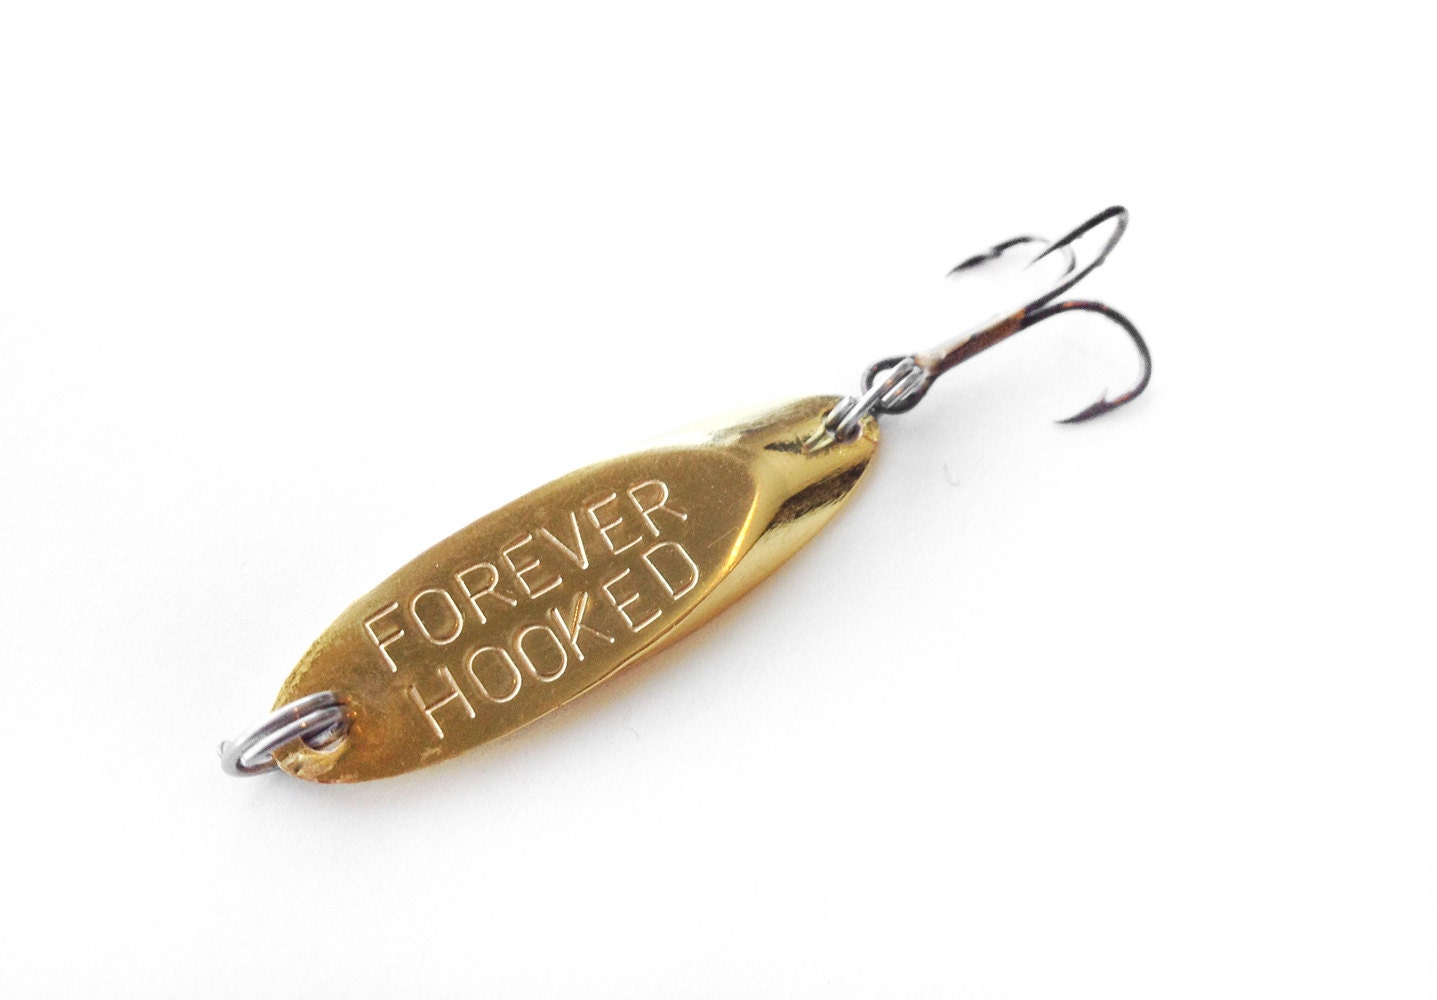 Real Fishing Lure, Anniversary Gift, Bass Fishing Lure, Spoon Lure Forever  Hooked, Wedding Groom Gift Bride to Groom Gift, Wedding Gift 